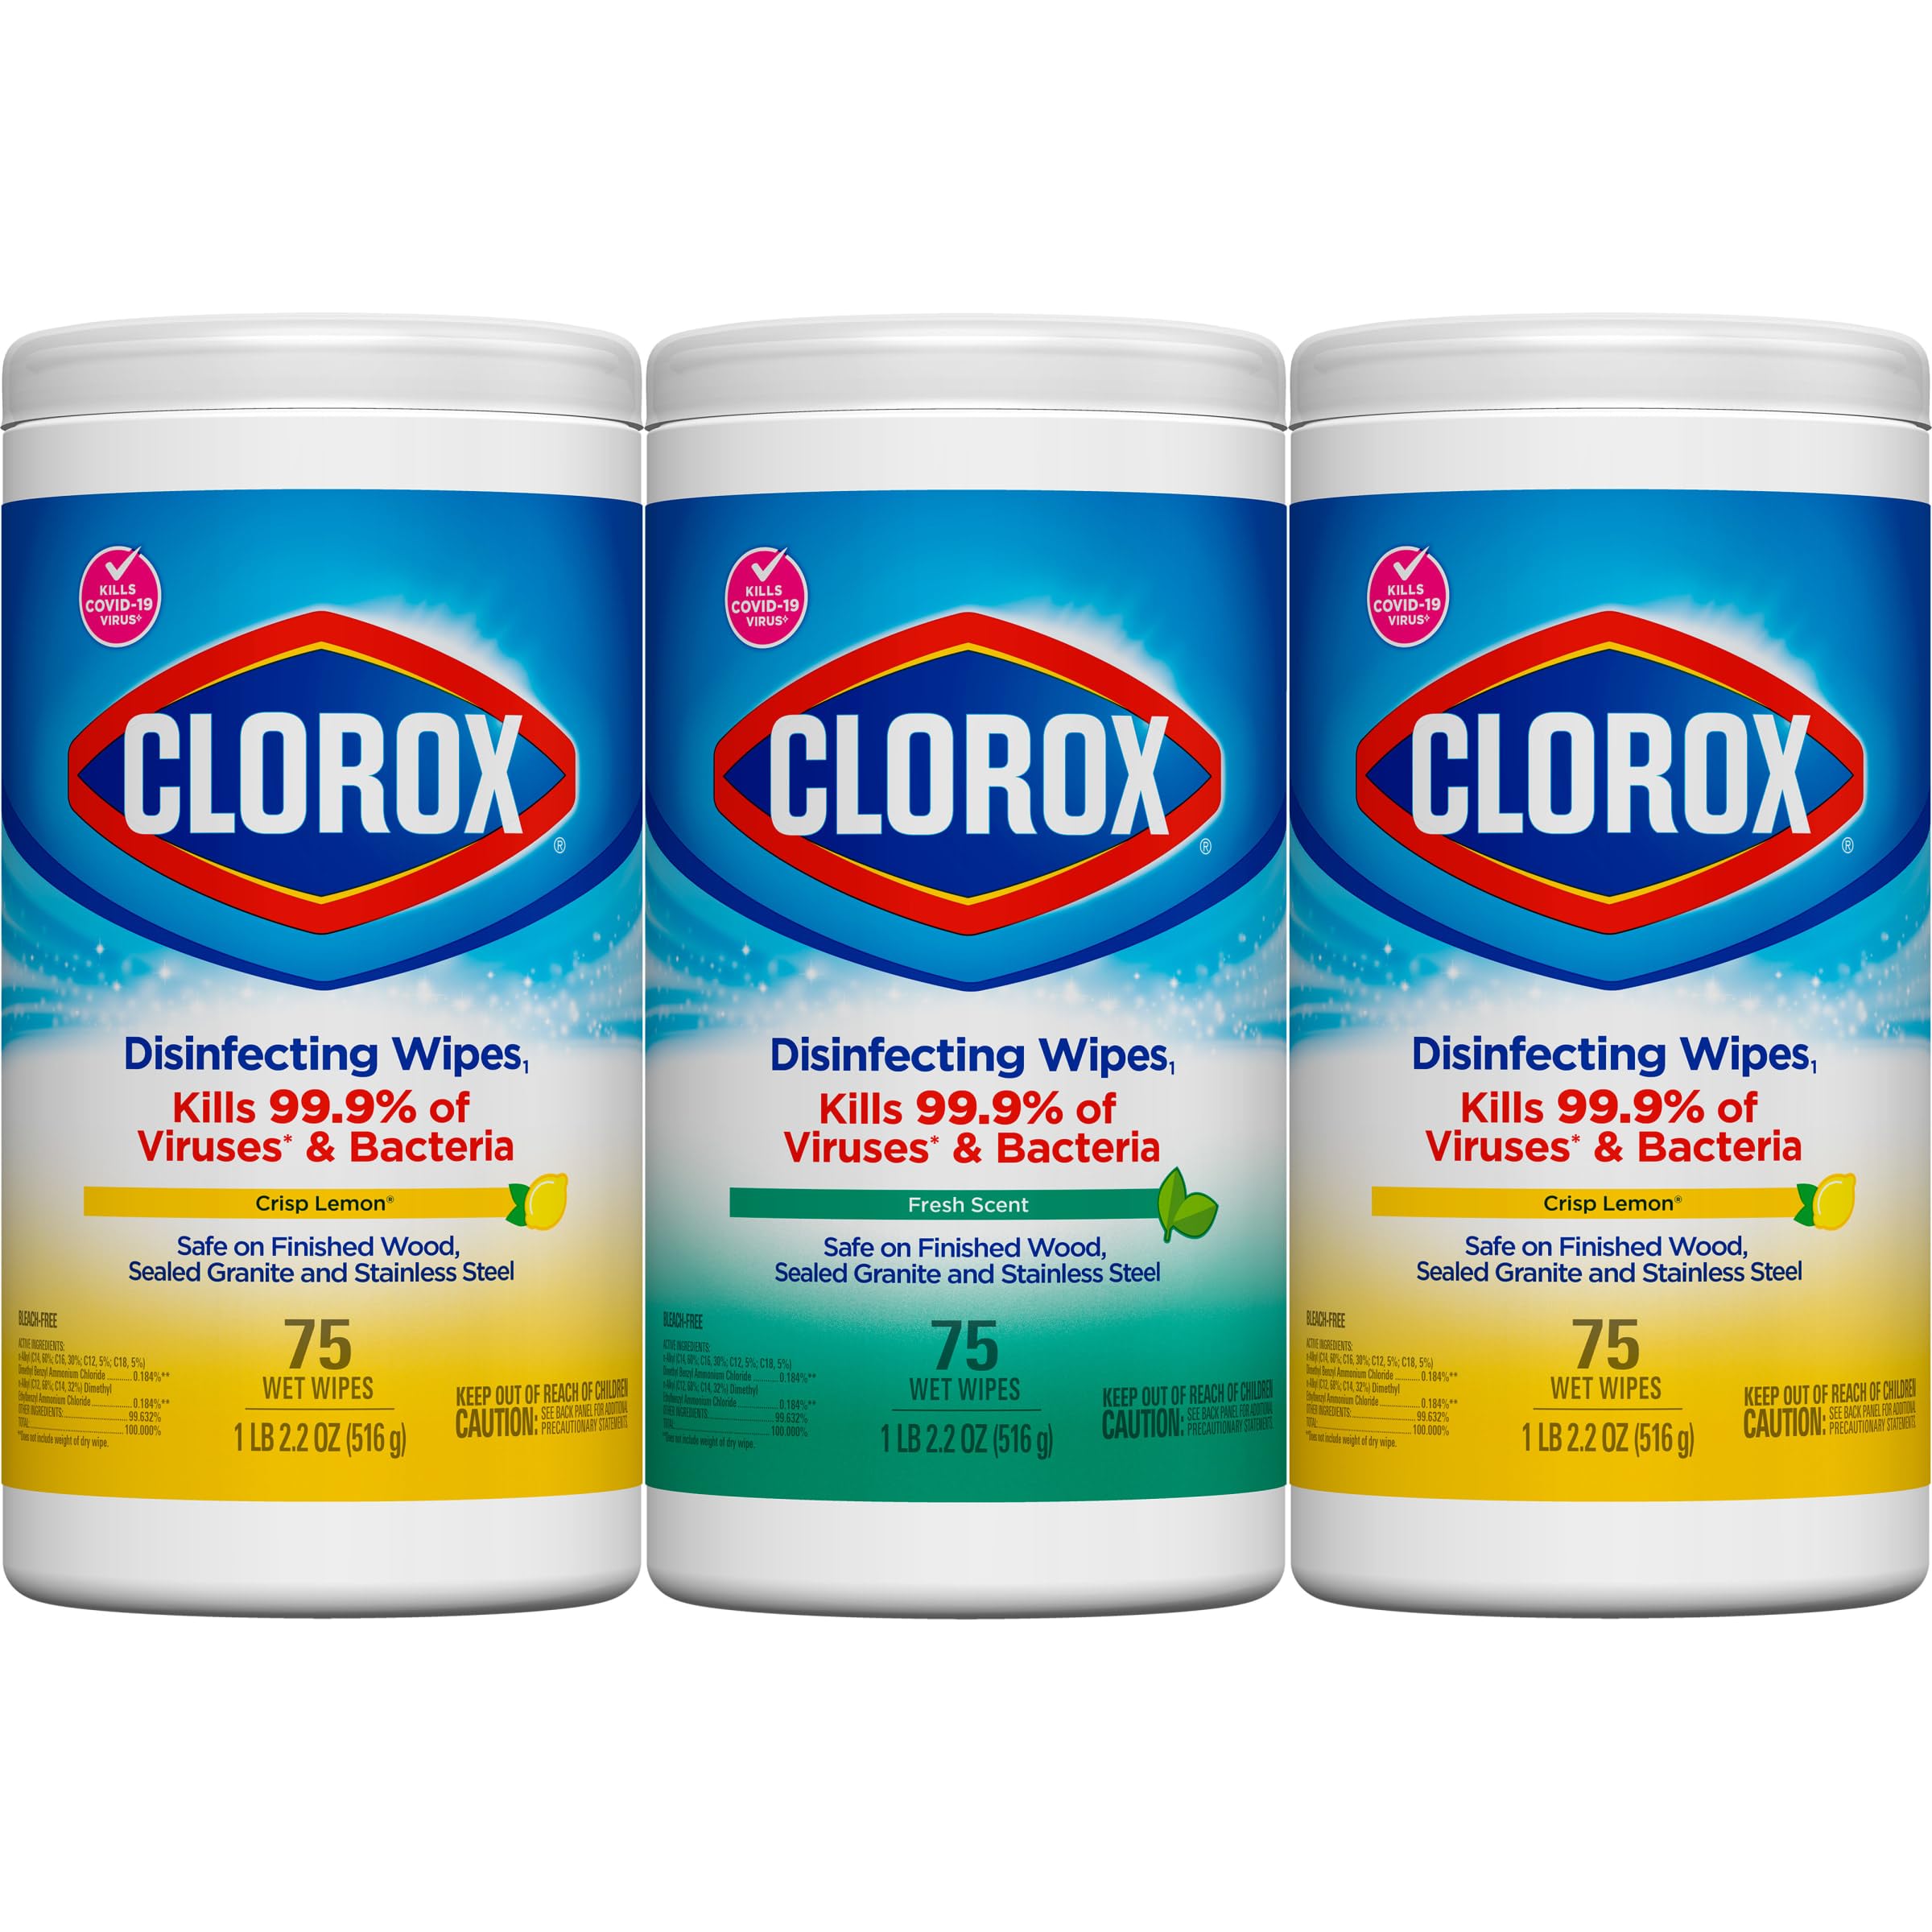 Clorox Disinfecting Wipes Value Pack, Cleaning Wipes